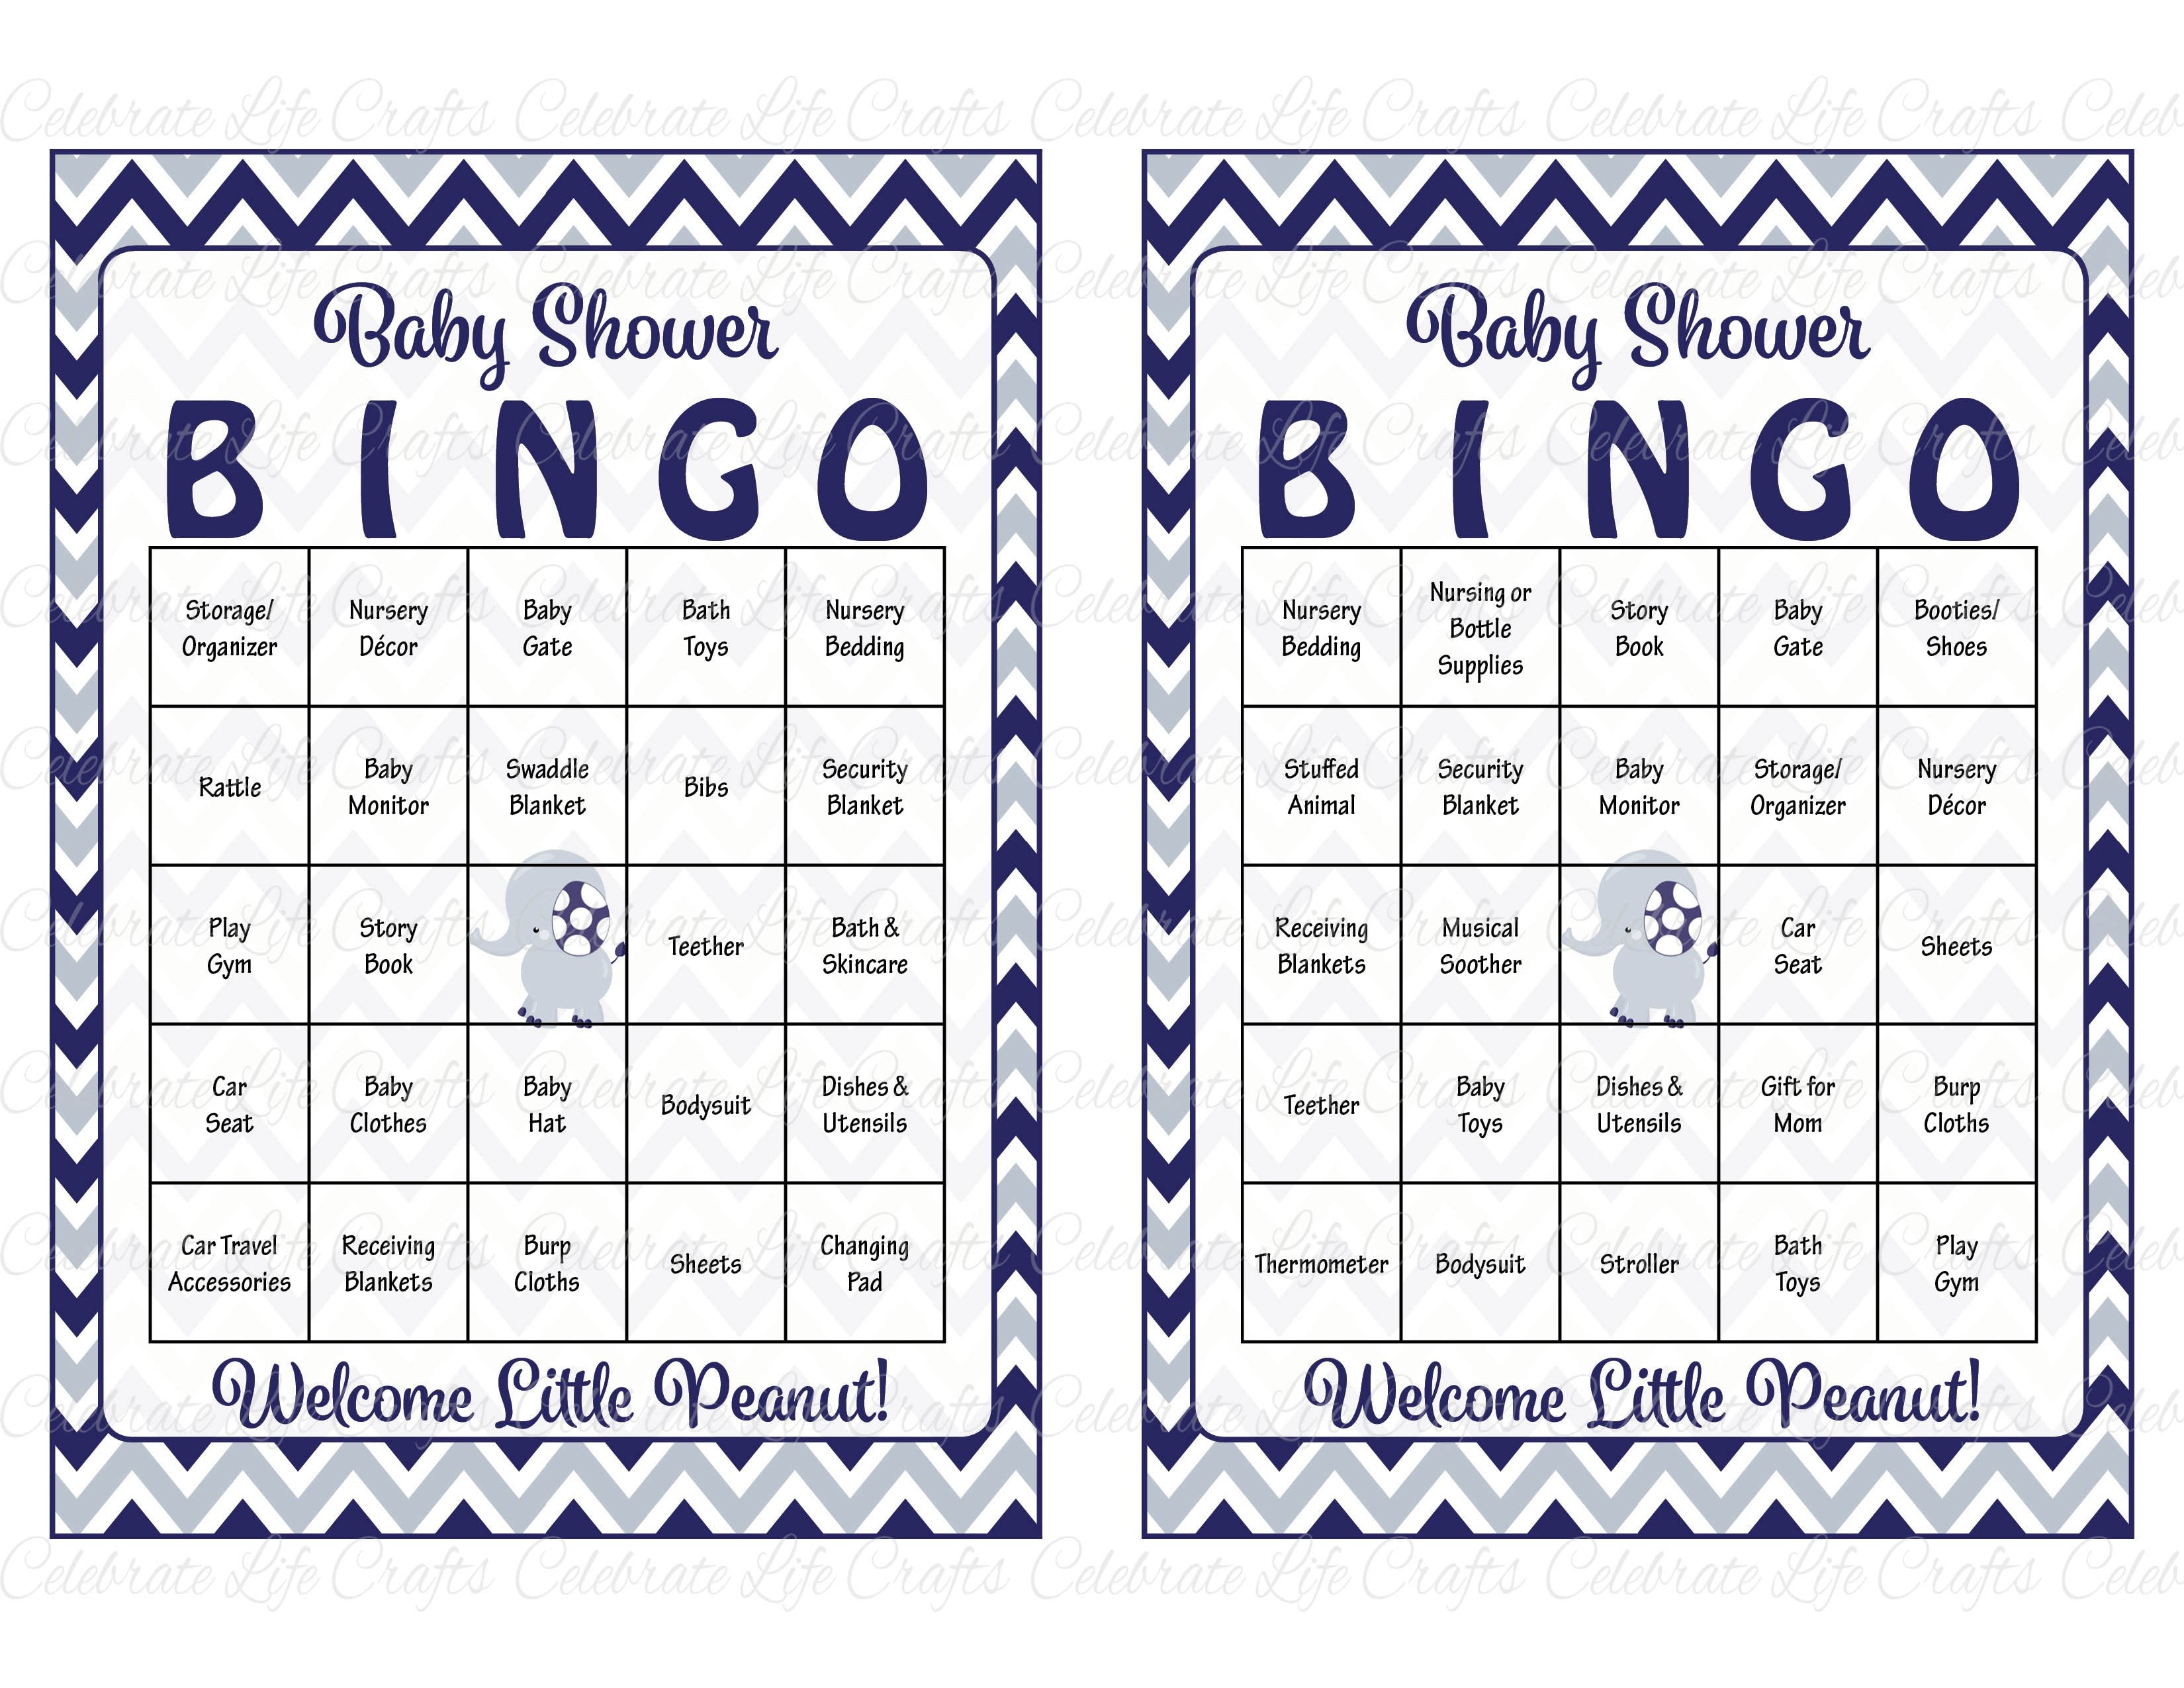 elephant-baby-shower-game-download-for-boy-baby-bingo-celebrate-life-crafts